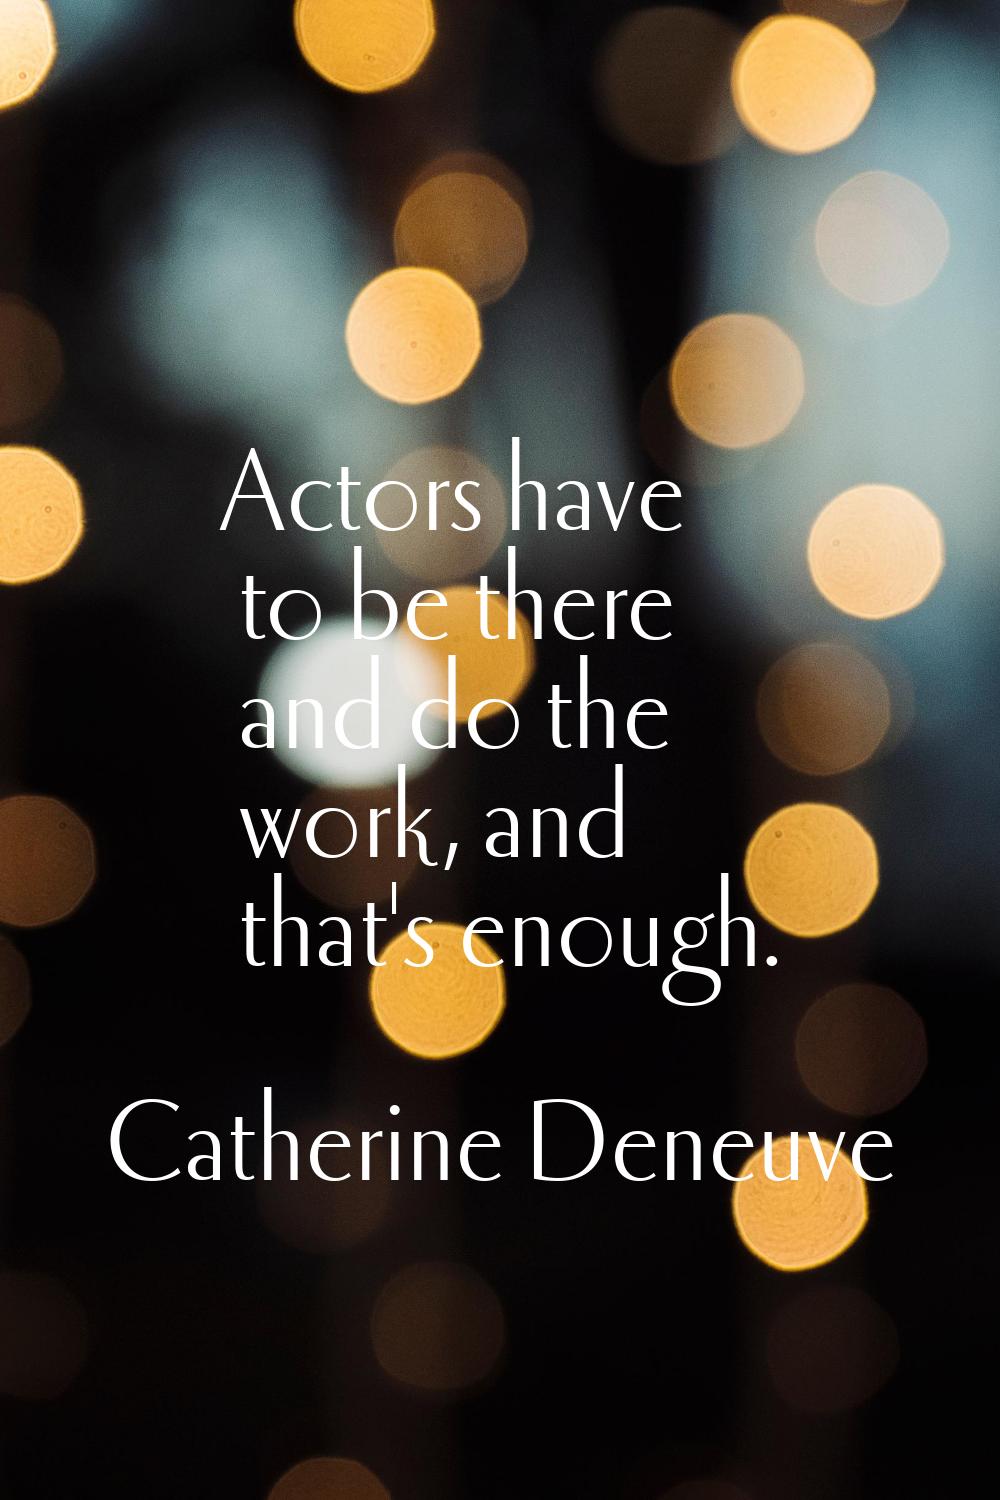 Actors have to be there and do the work, and that's enough.